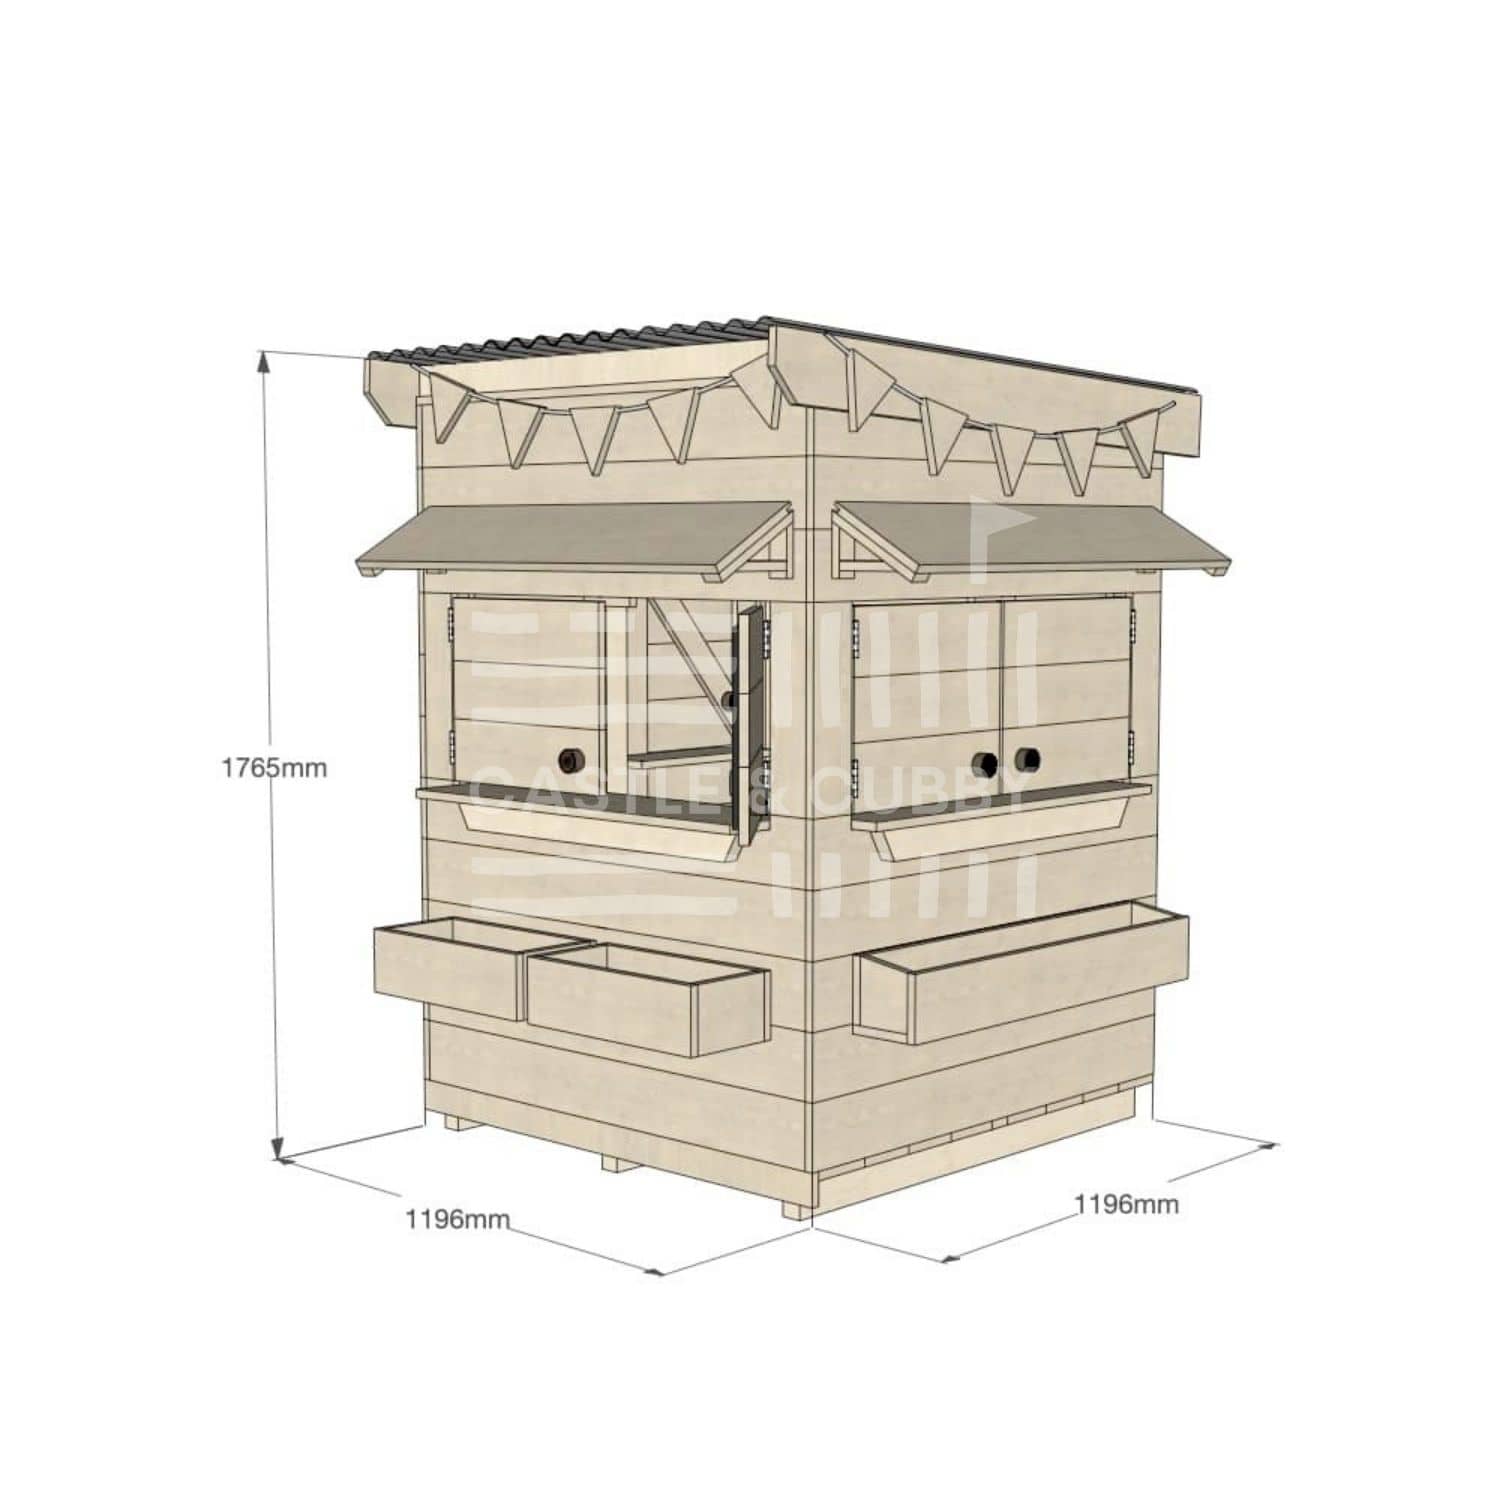 Flat roof raw wooden cubby house residential little square with dimensions